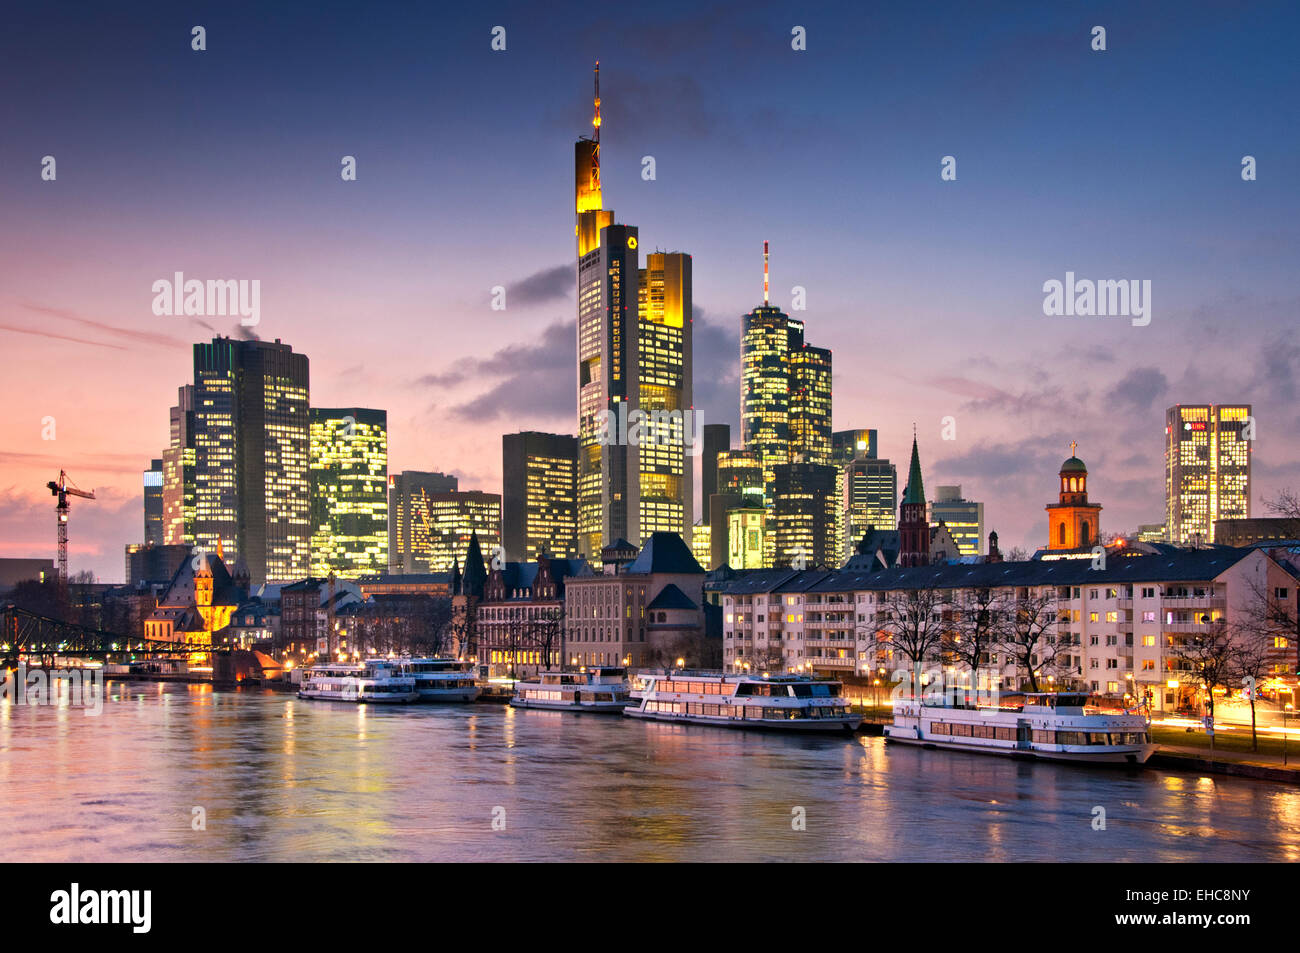 The River Main & Skyscrapers of Frankfurt's Business District at Sunset, Frankfurt, Germany, Europe Stock Photo